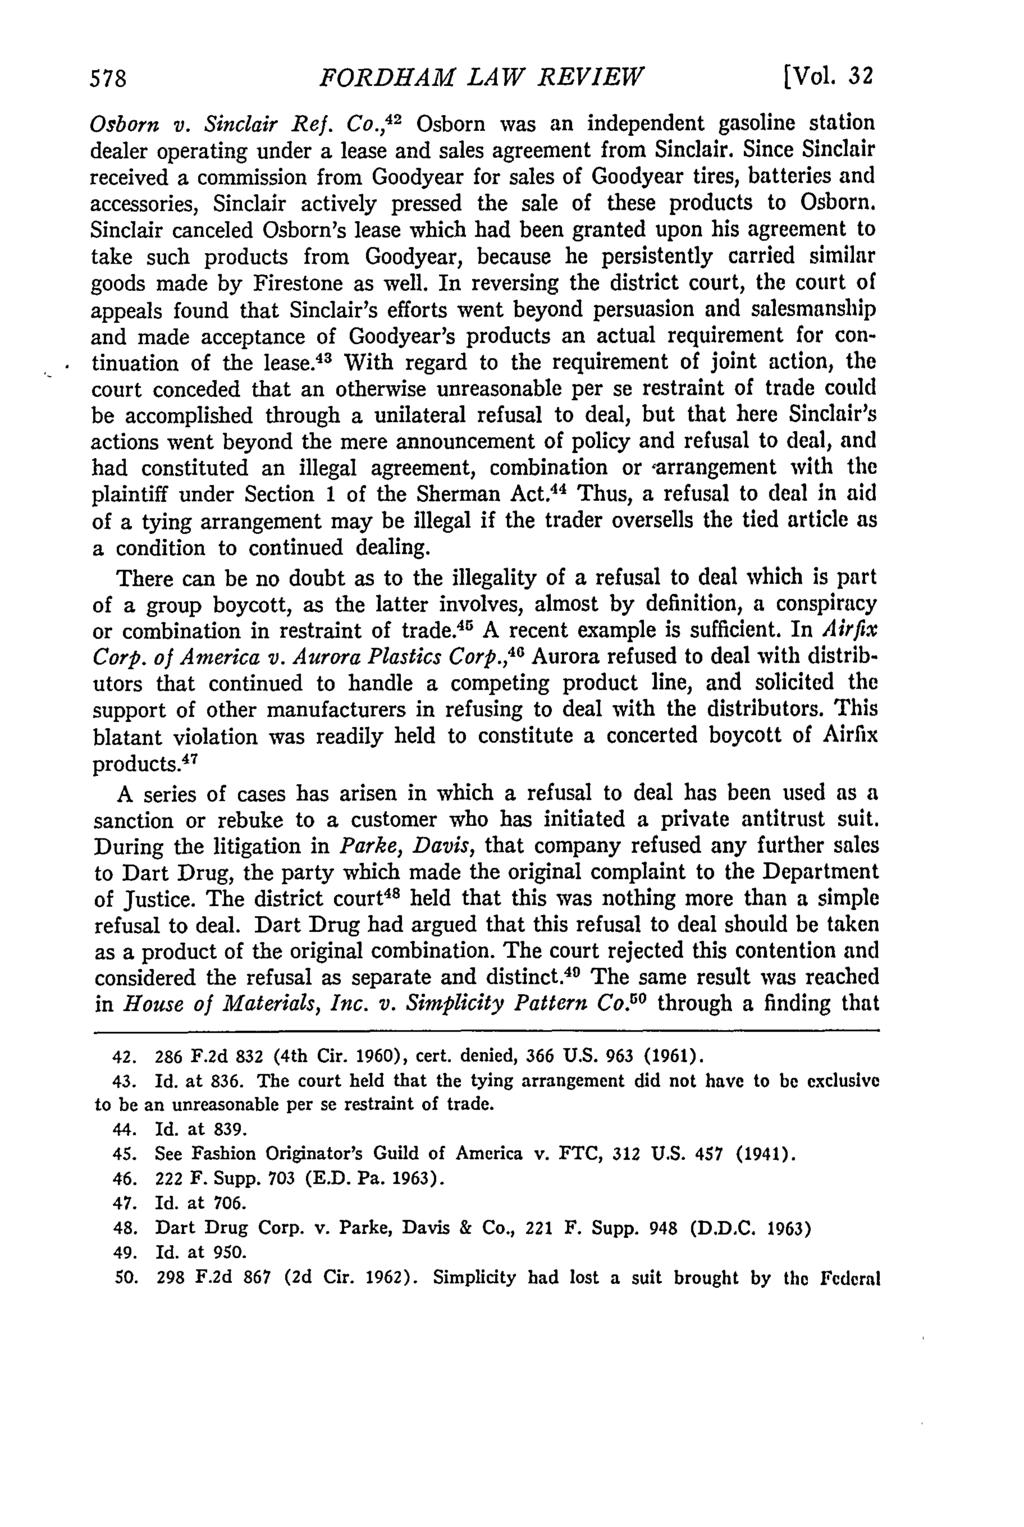 FORDHAM LAW REVIEW [Vol. 3 2 Osborn v. Sinclair Ref. Co., 42 Osborn was an independent gasoline station dealer operating under a lease and sales agreement from Sinclair.